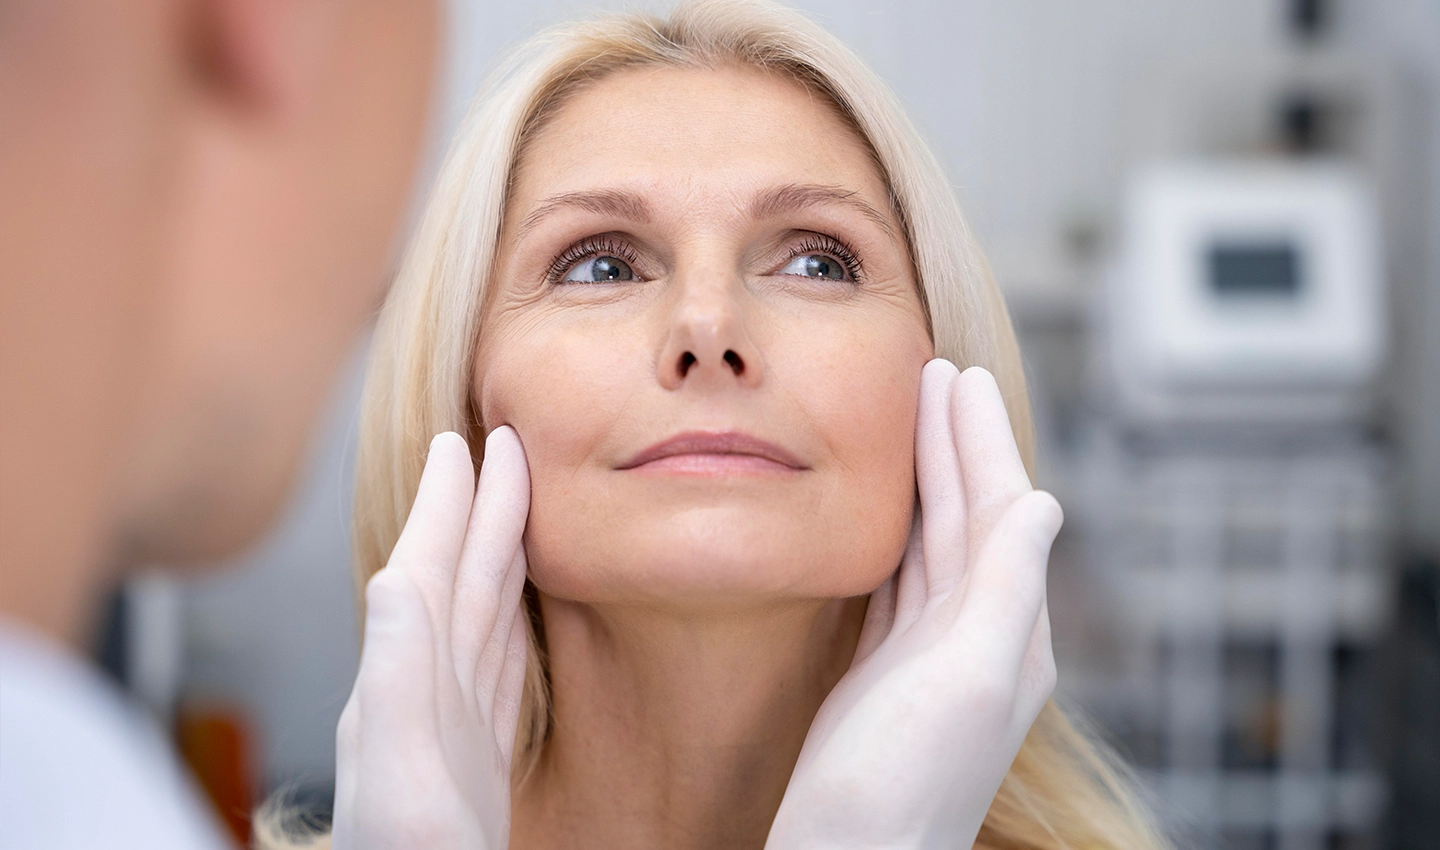 A woman with a natural-looking facelift result